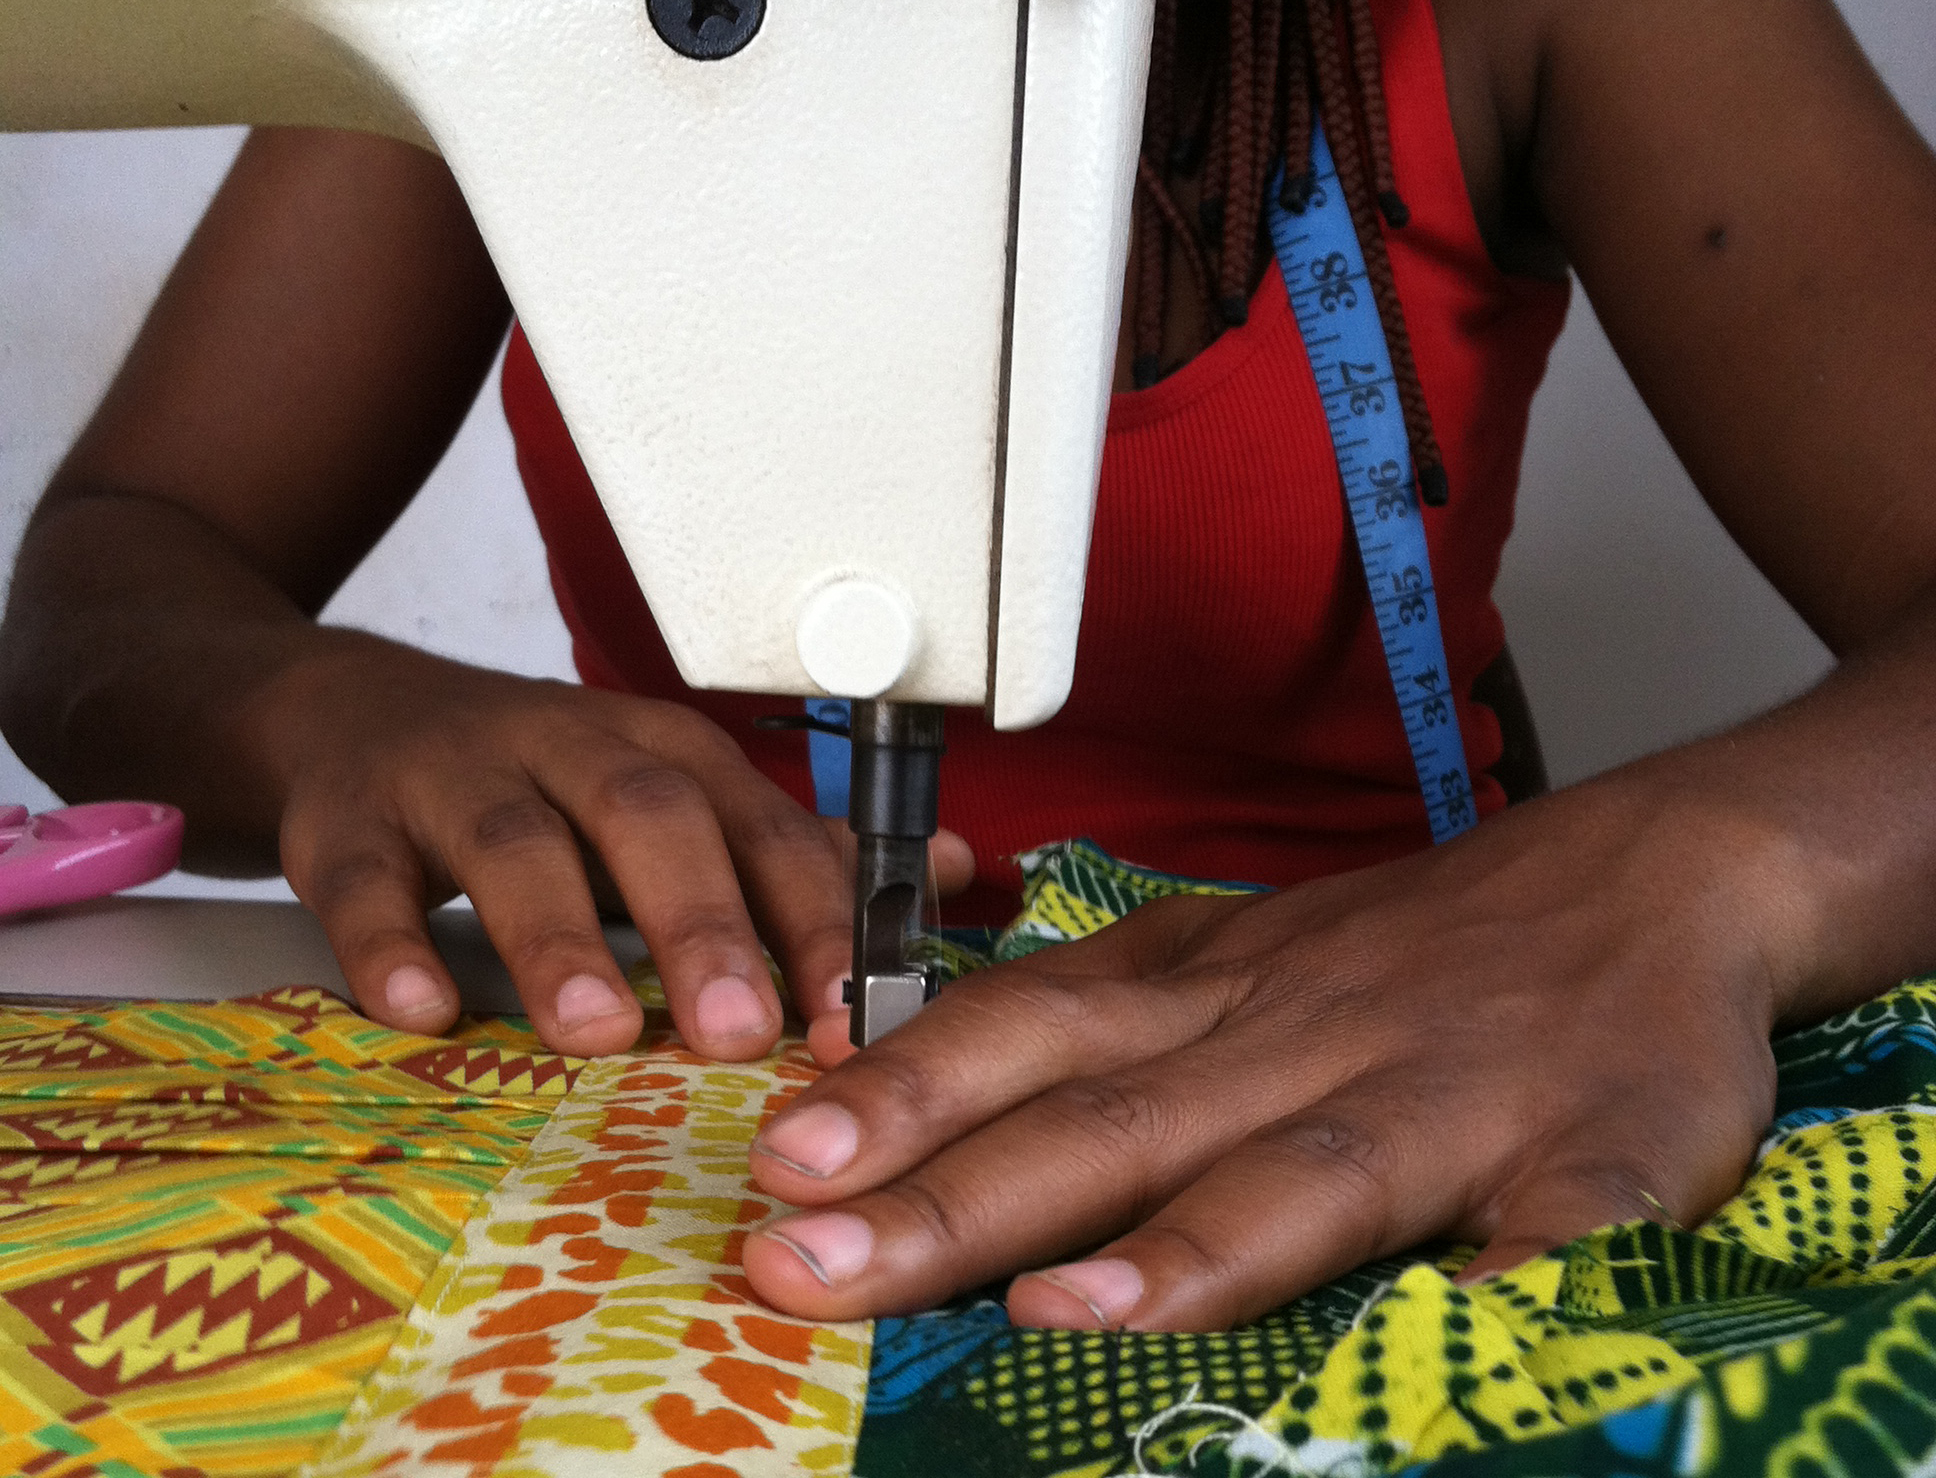 A tailoring apprentice in Ghana using an overlocking sewing machine. © 2014 Morgan Hardy